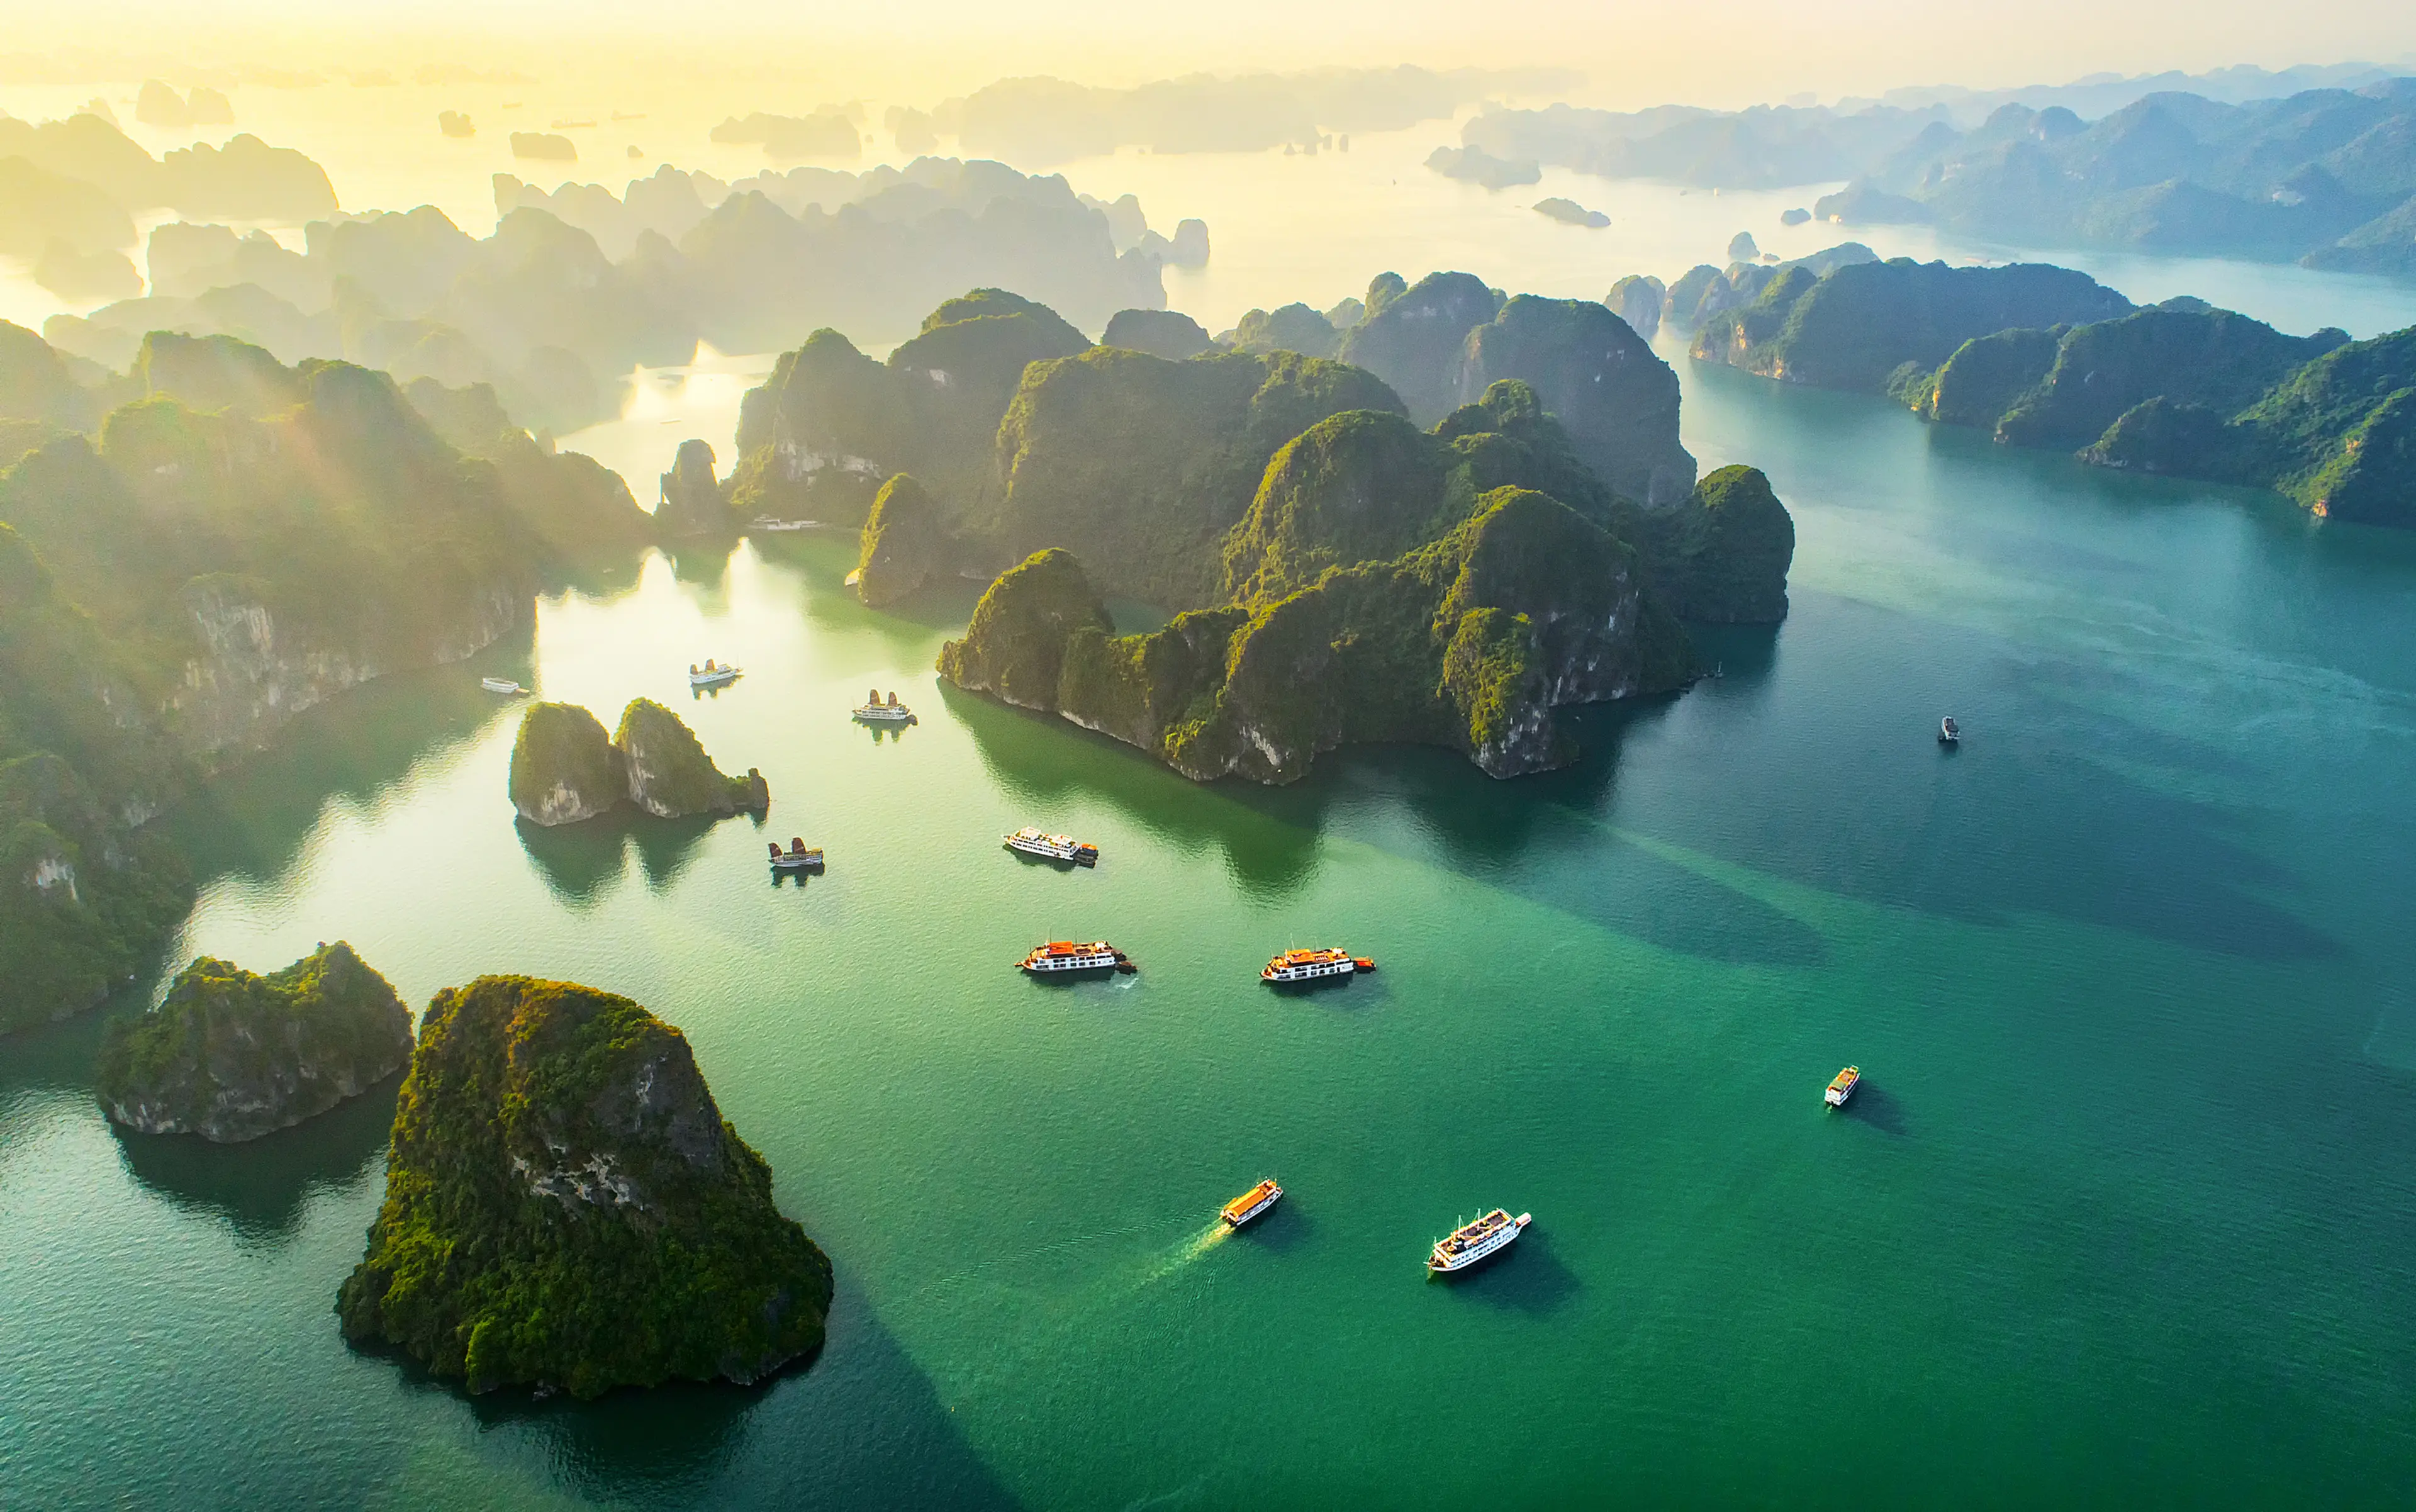 3-Day Local Experience for Couples in Ha Long Bay, Vietnam